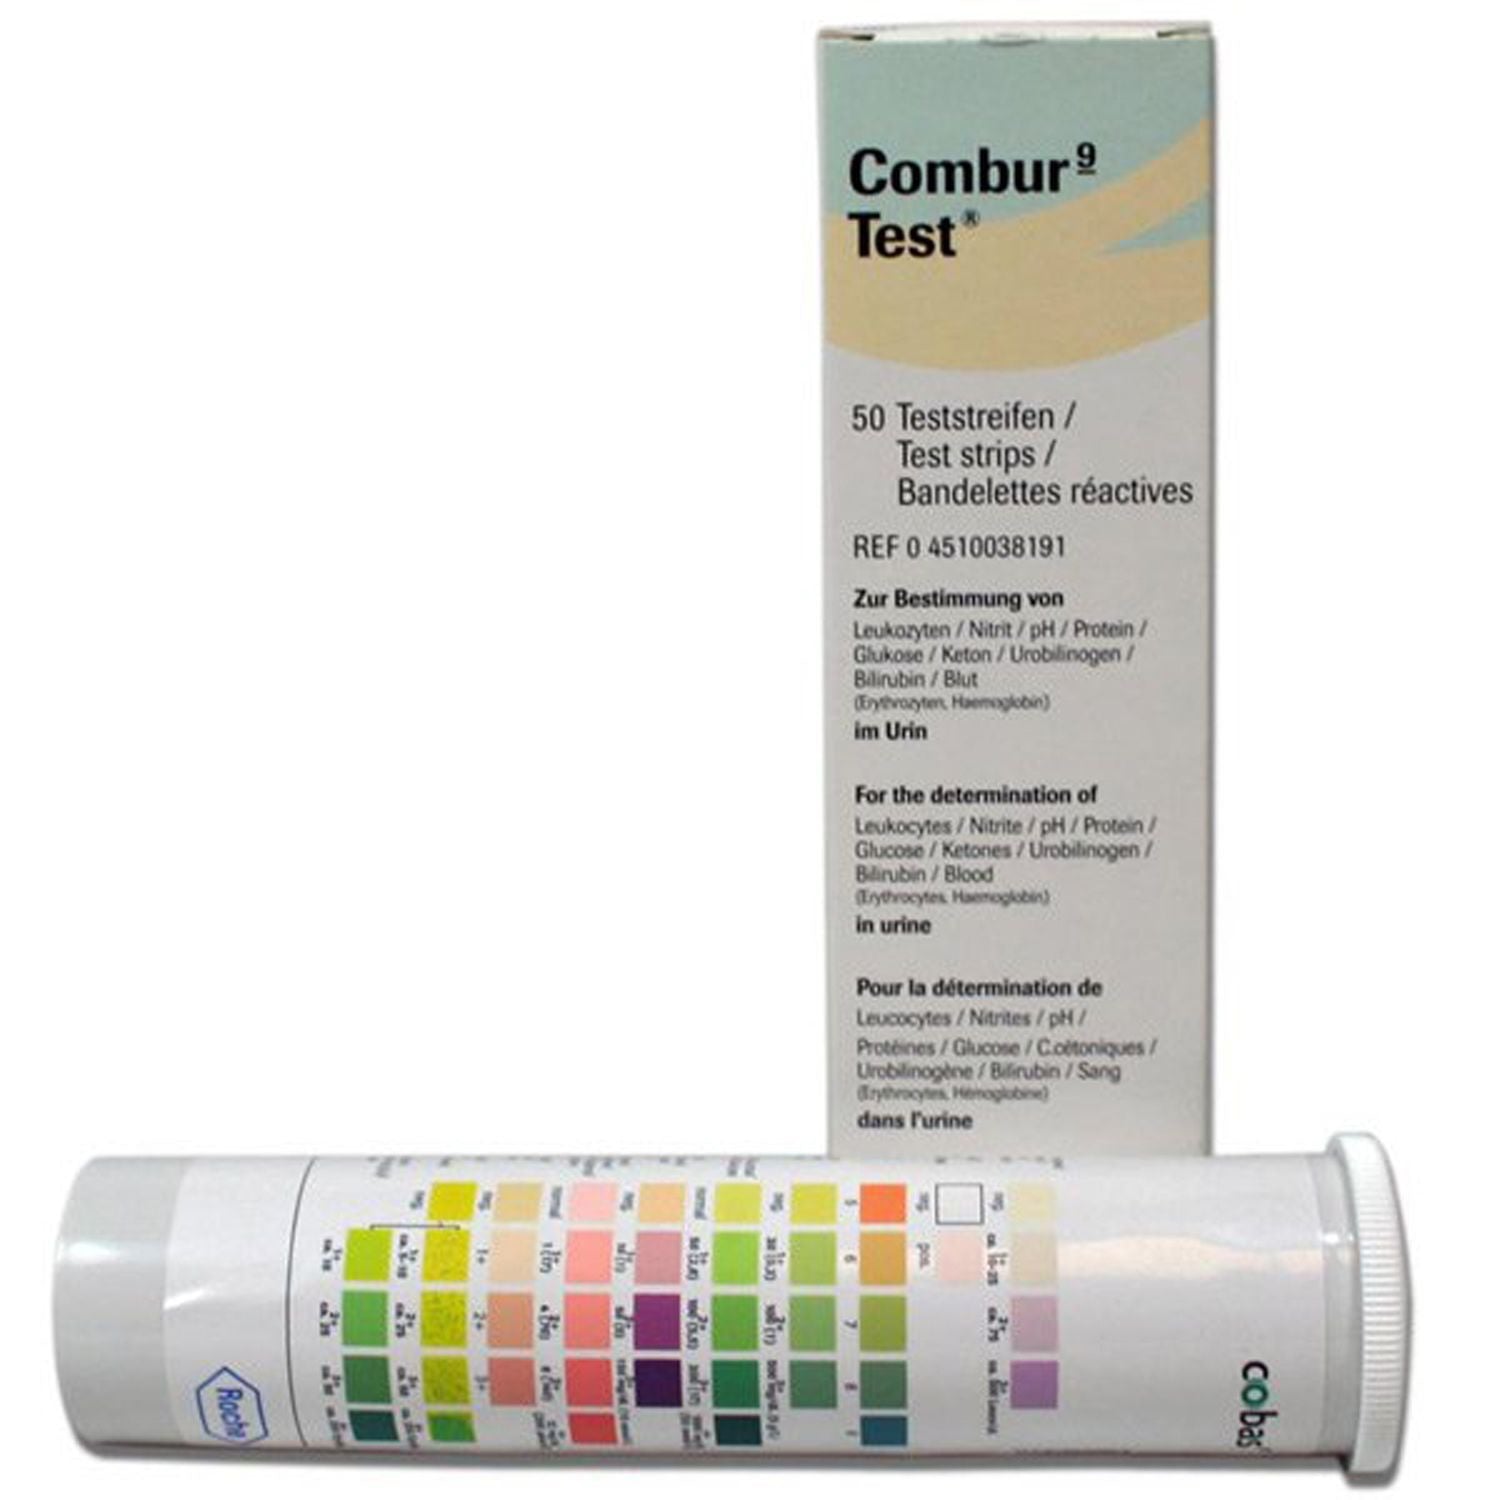 Roche Urinalysis Reagent Strips Combur9 Test | Pack of 100